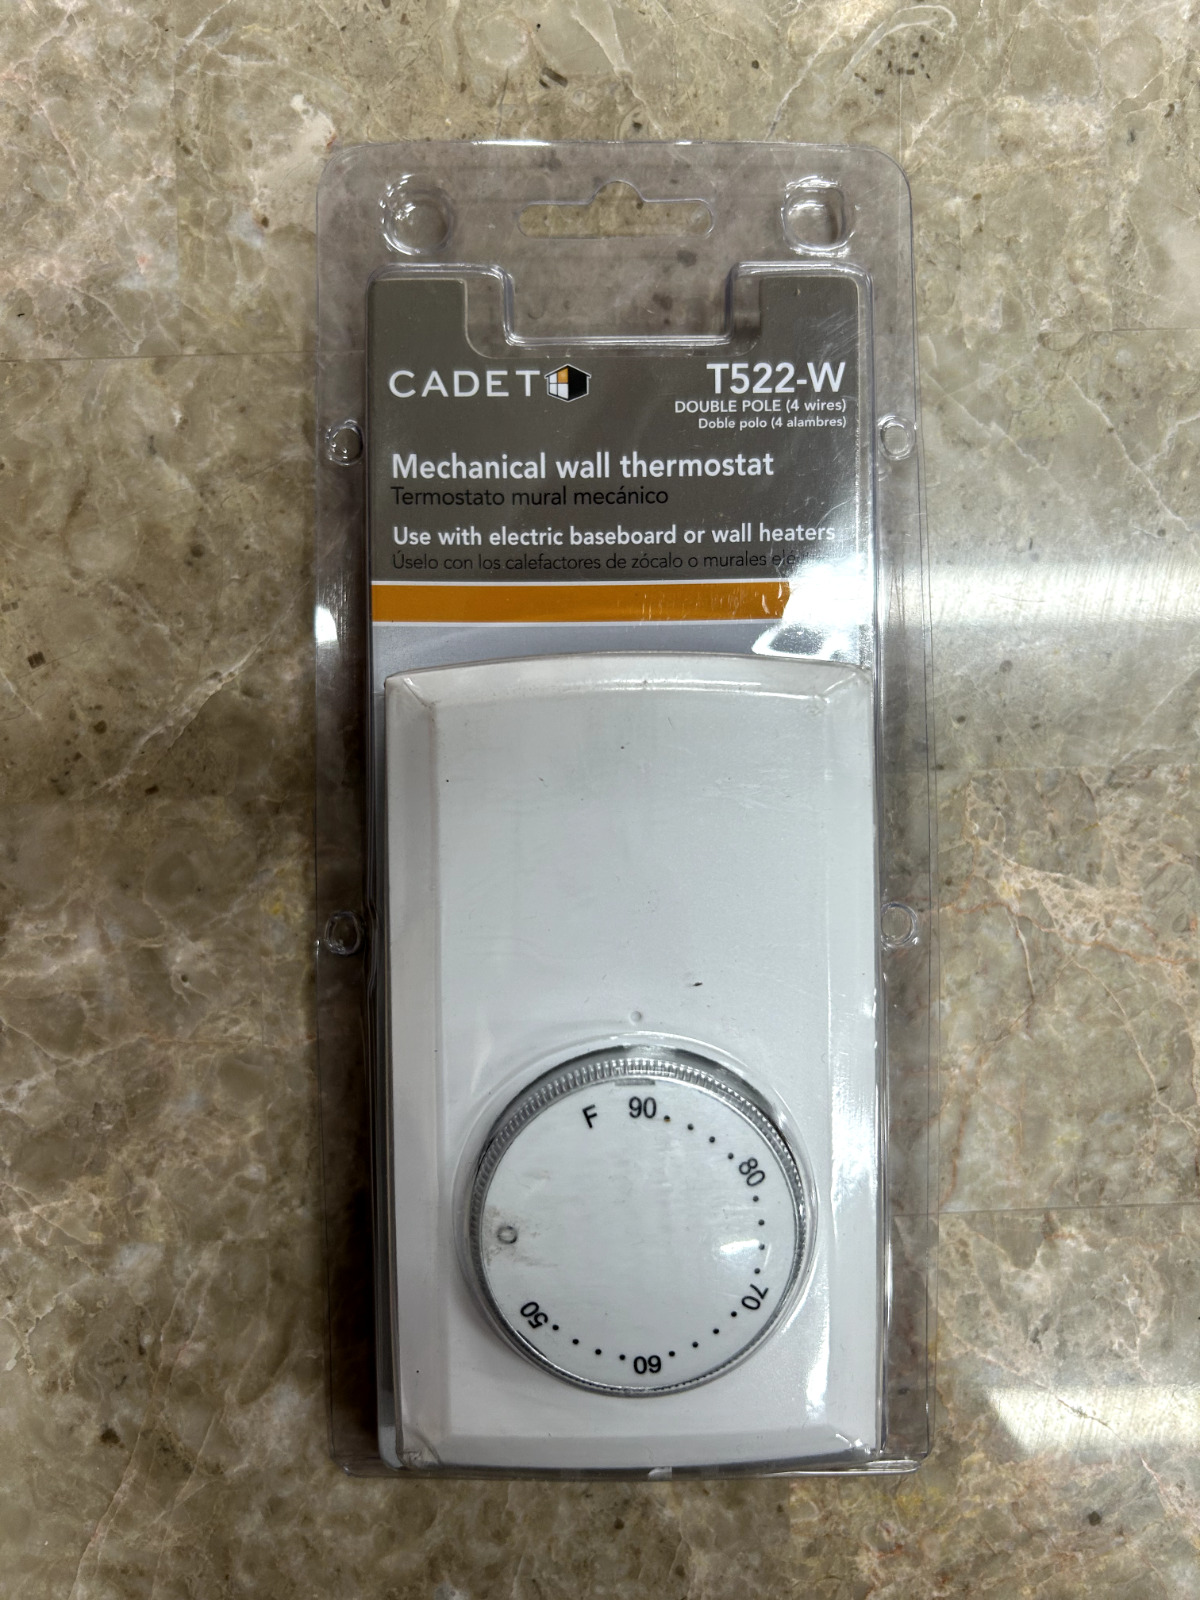 Cadet Mechanical Wall Thermostat - T522-W